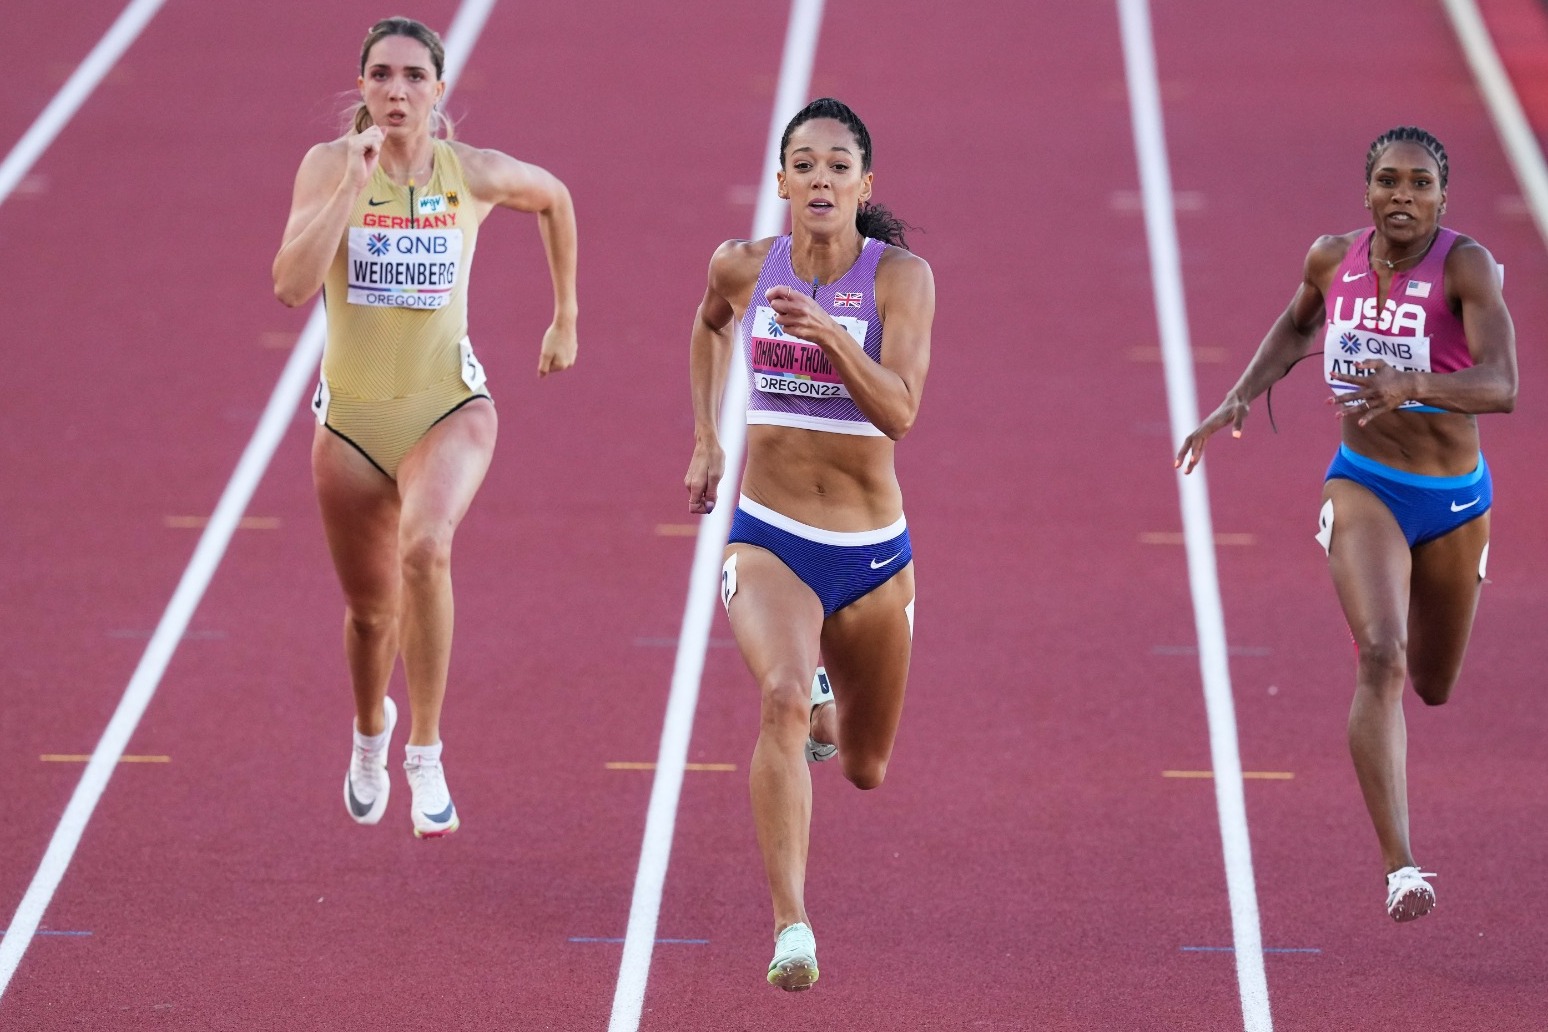 Katarina Johnson-Thompson frustrated at failure to challenge for medals 